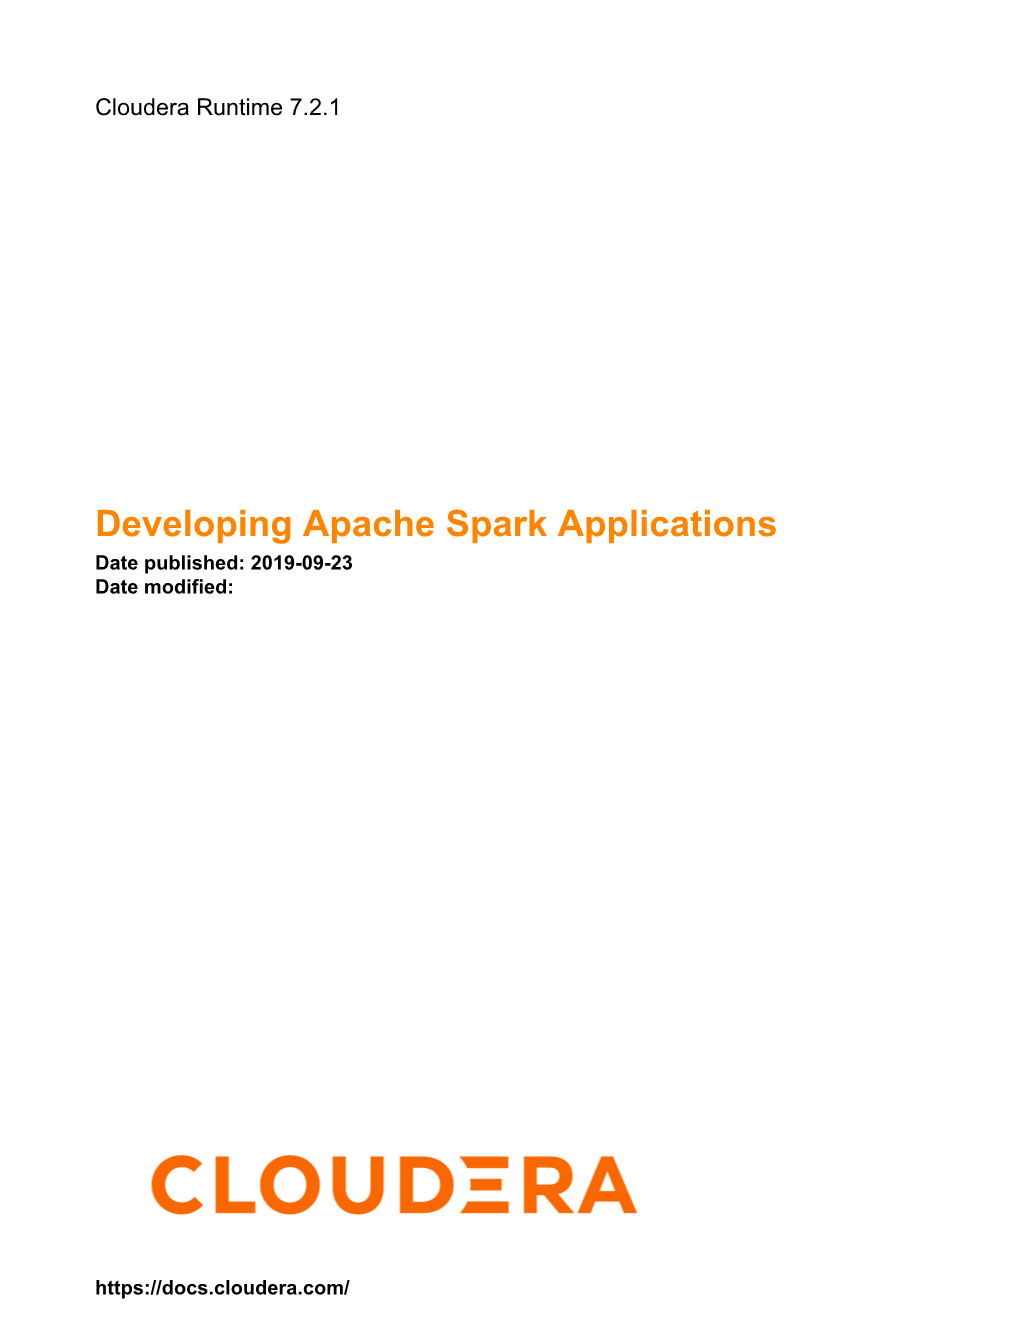 Developing Apache Spark Applications Date Published: 2019-09-23 Date Modified